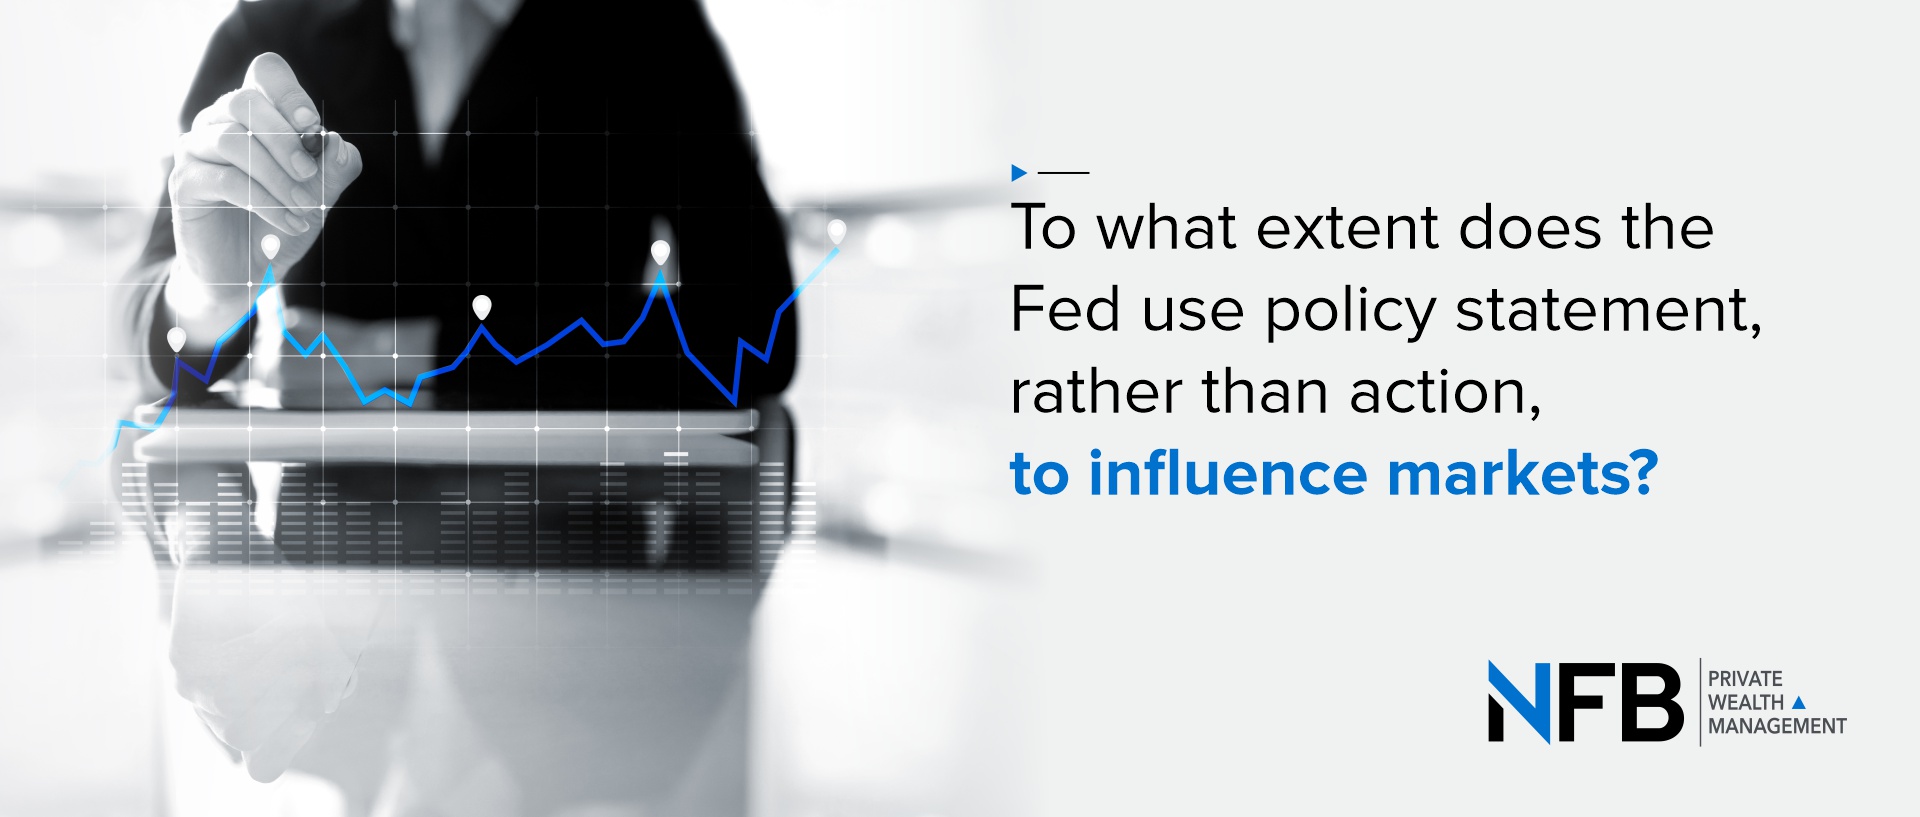 To what extent does the Fed use policy statement, rather than policy action, to influence markets?